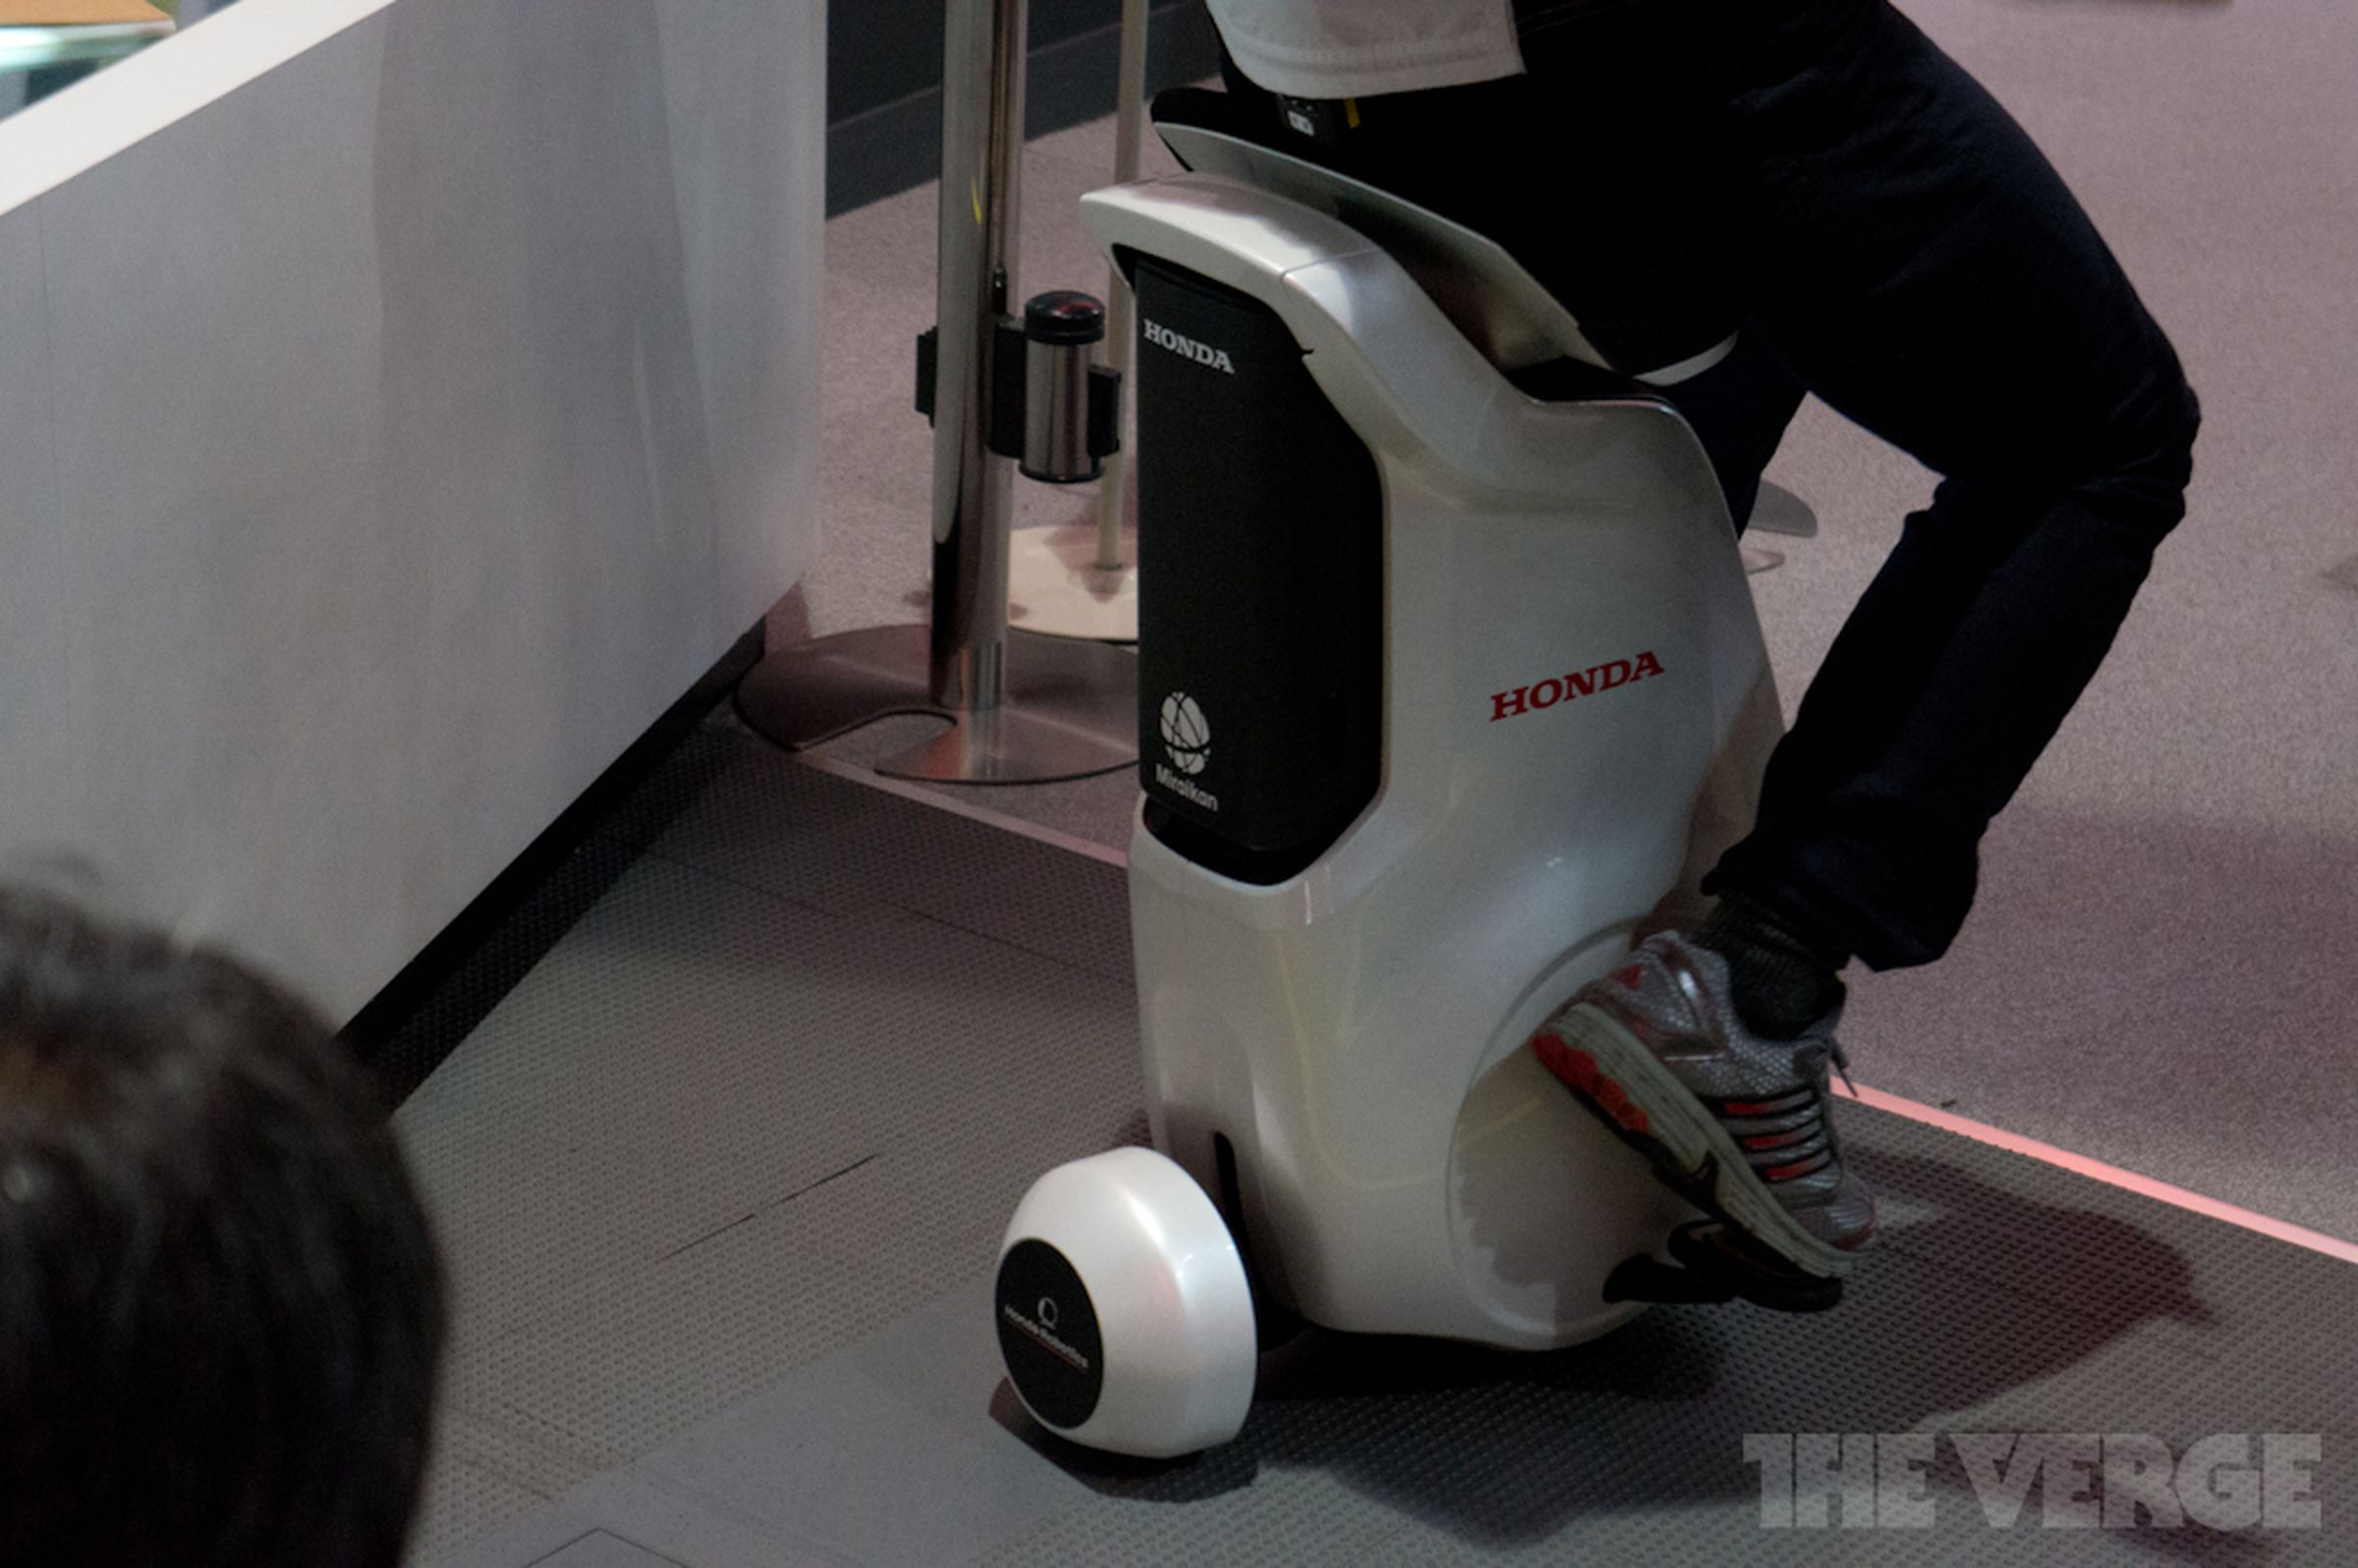 A first look at Honda's Uni-Cub personal mobility device